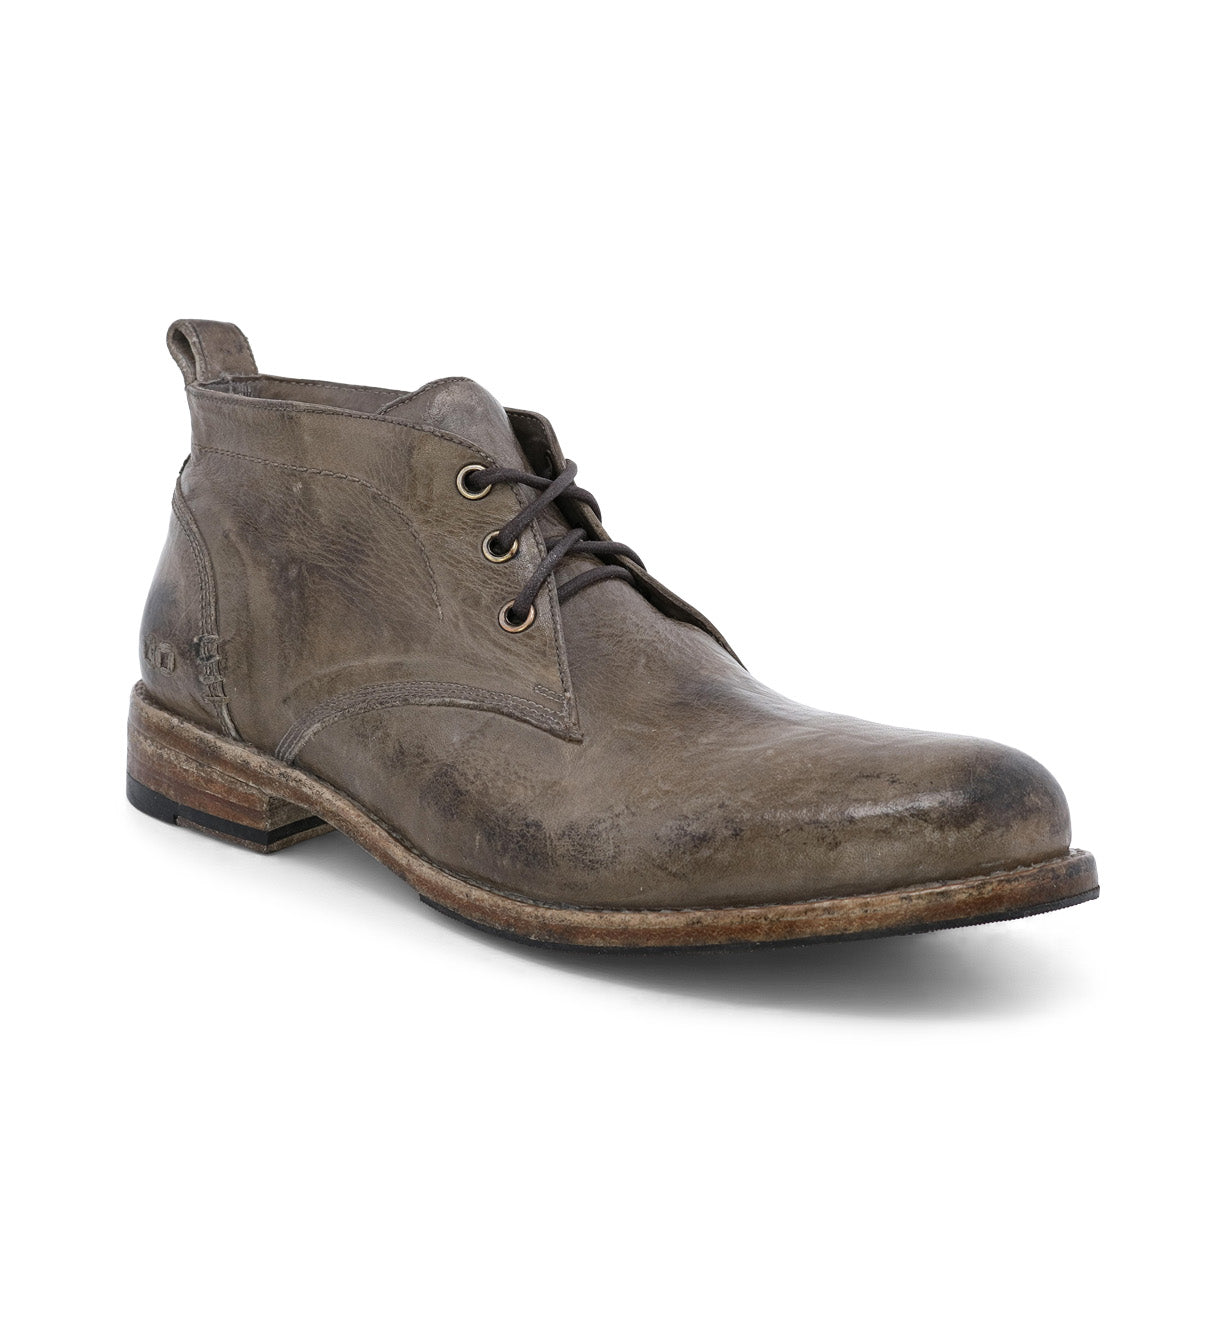 A pair of Clyde men's brown leather chukka boots by Bed Stu.